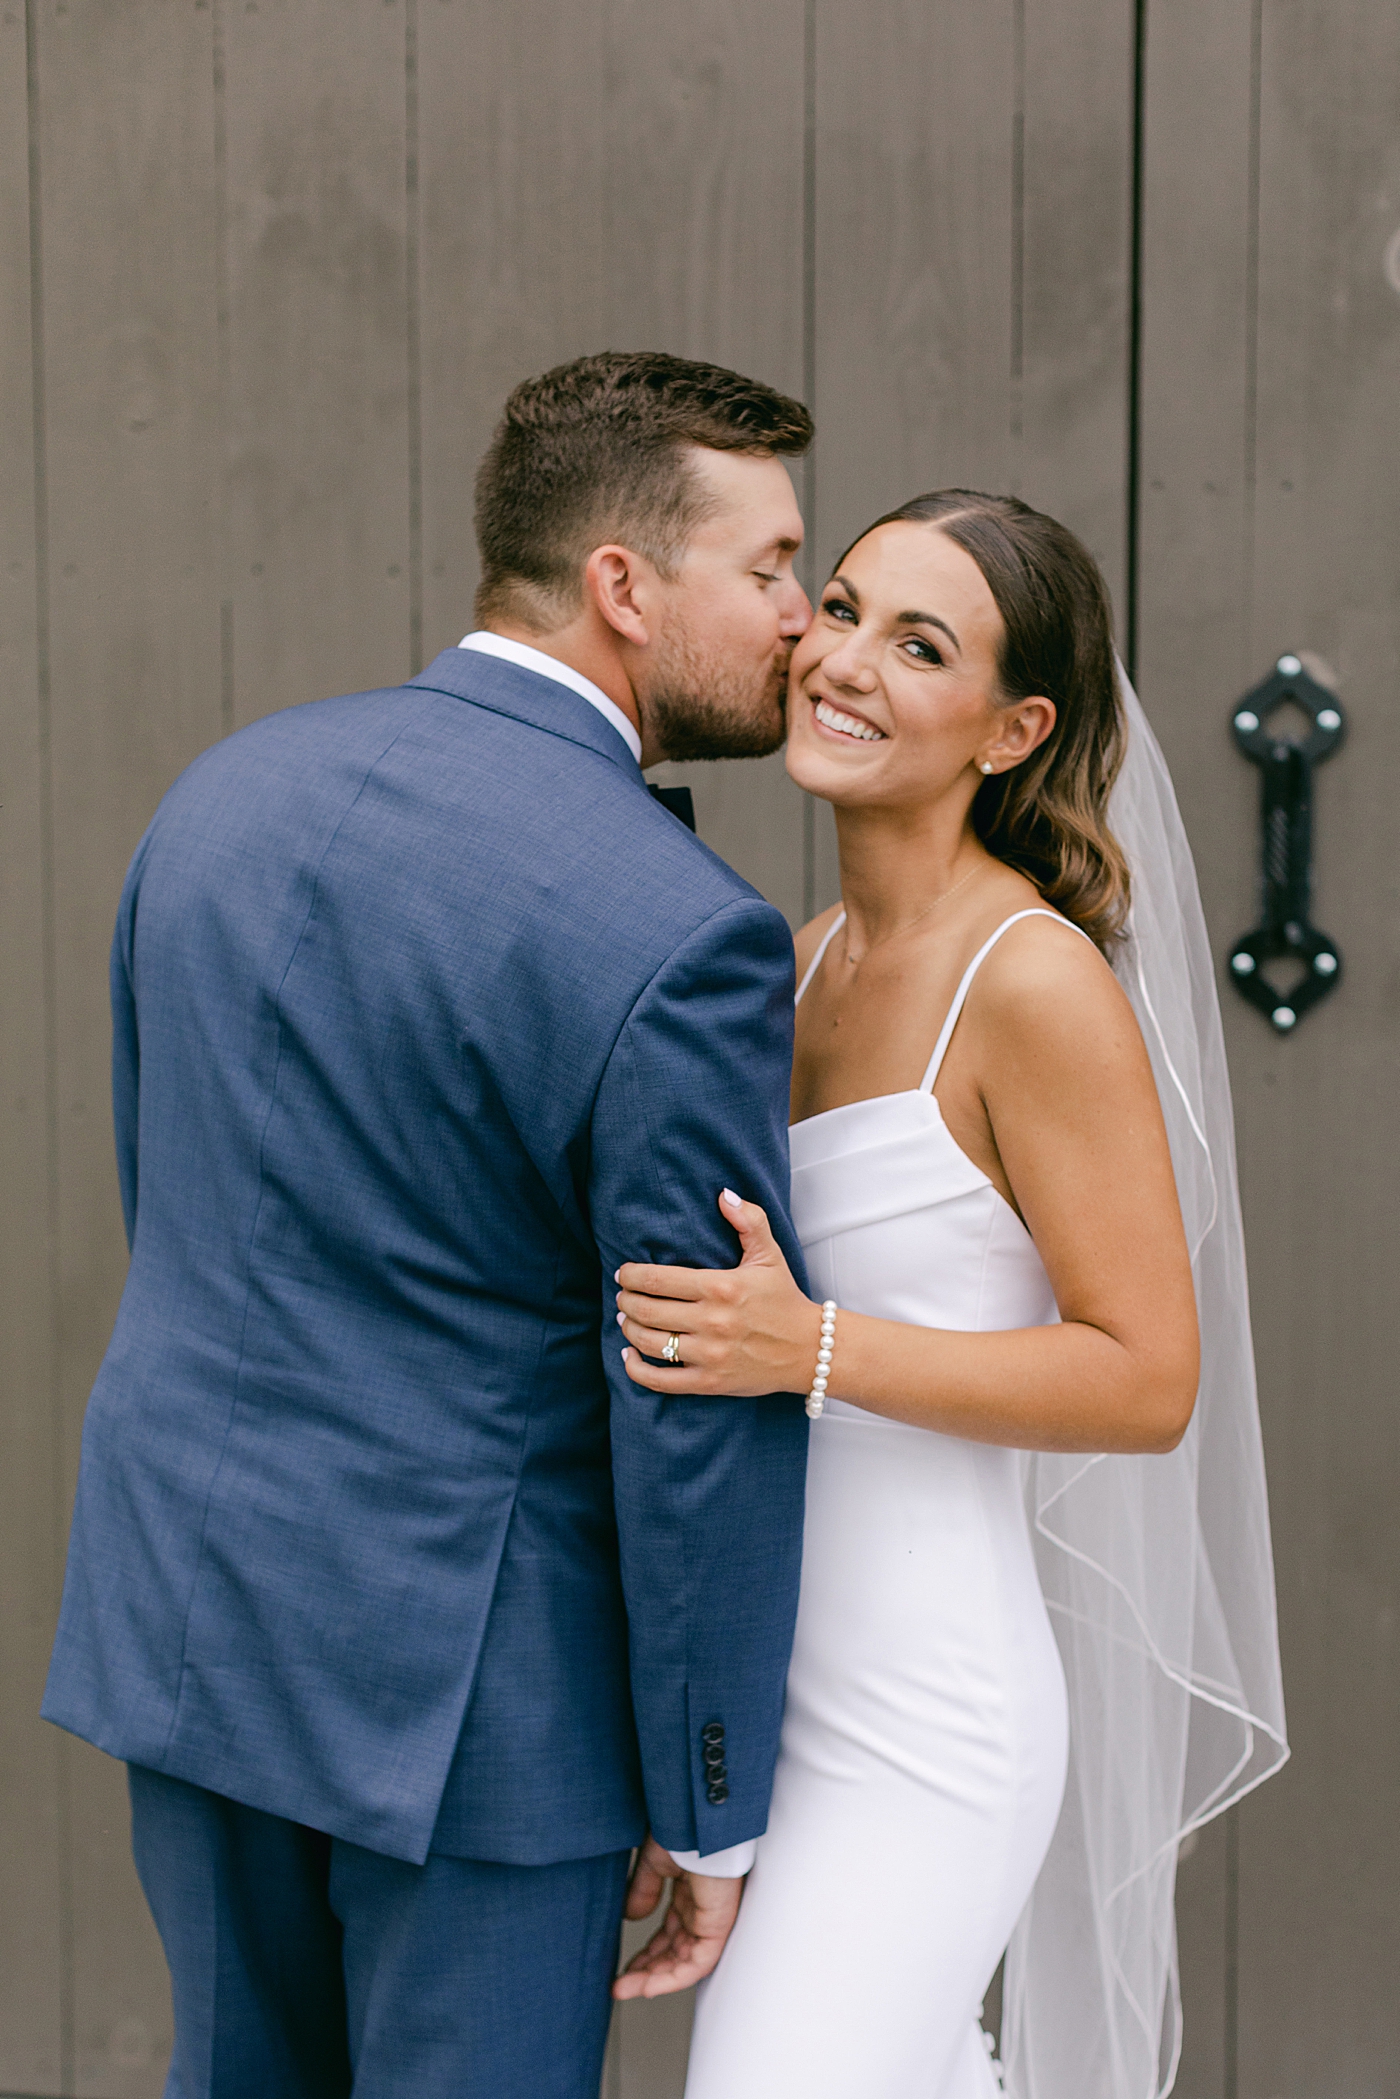 Groom kissing bride during couple portraits | Image by Hope Helmuth Photography